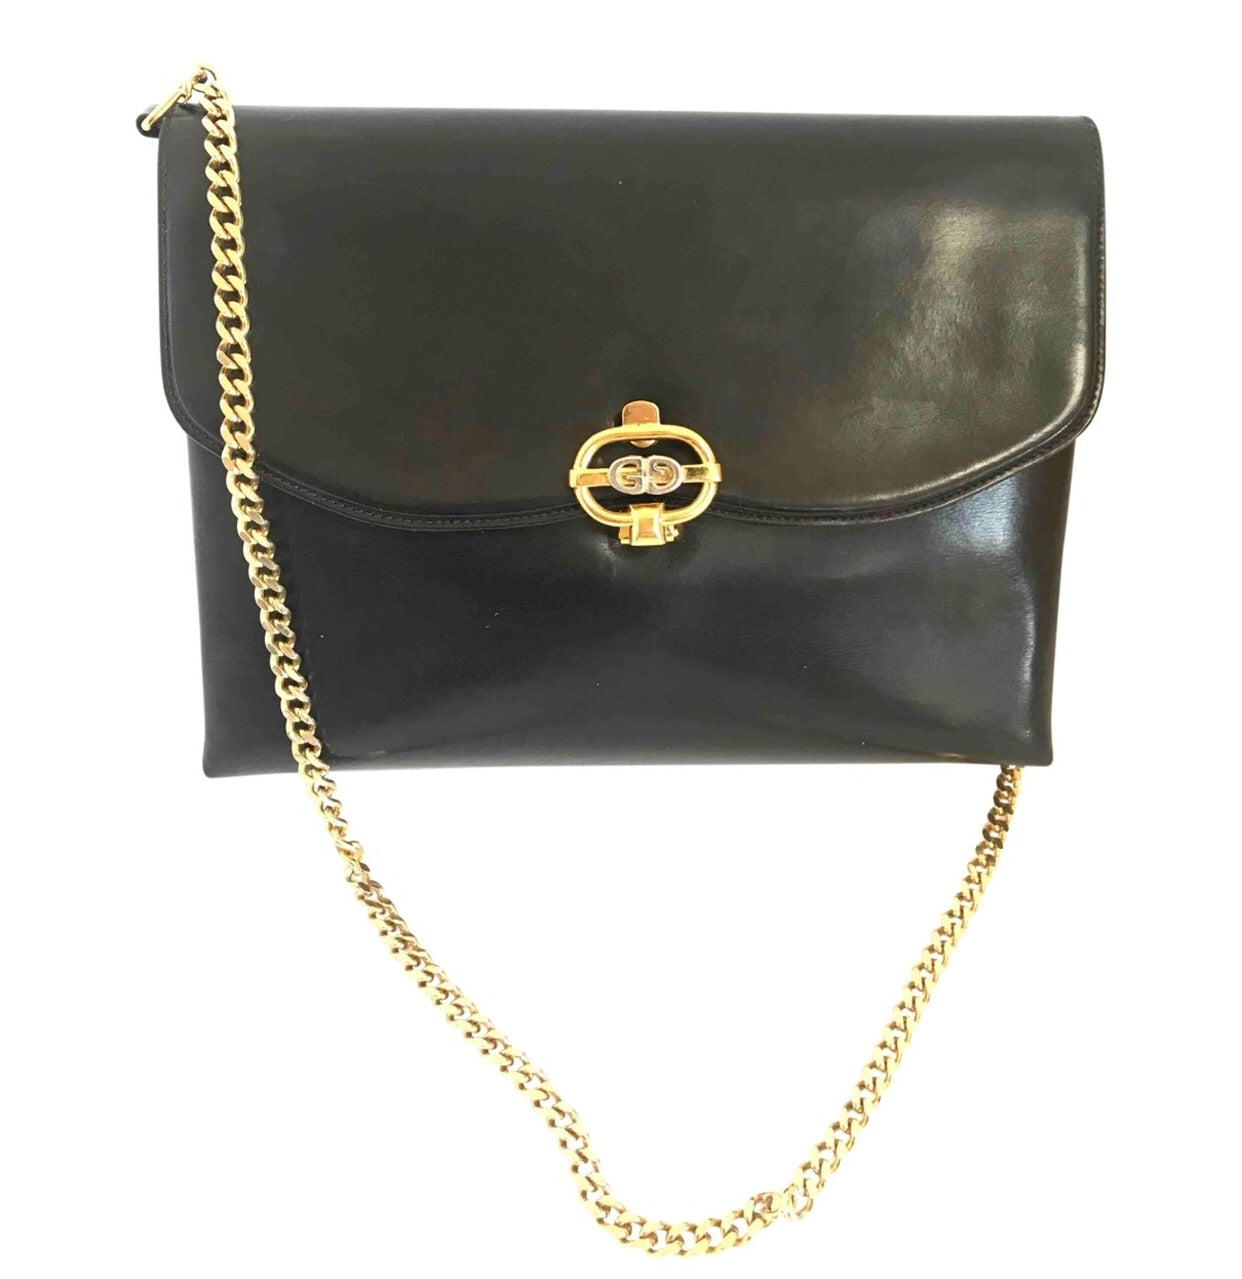 Luxury Shoulder Strap - Oval Chain - Gold or Silver - For Your Bags!